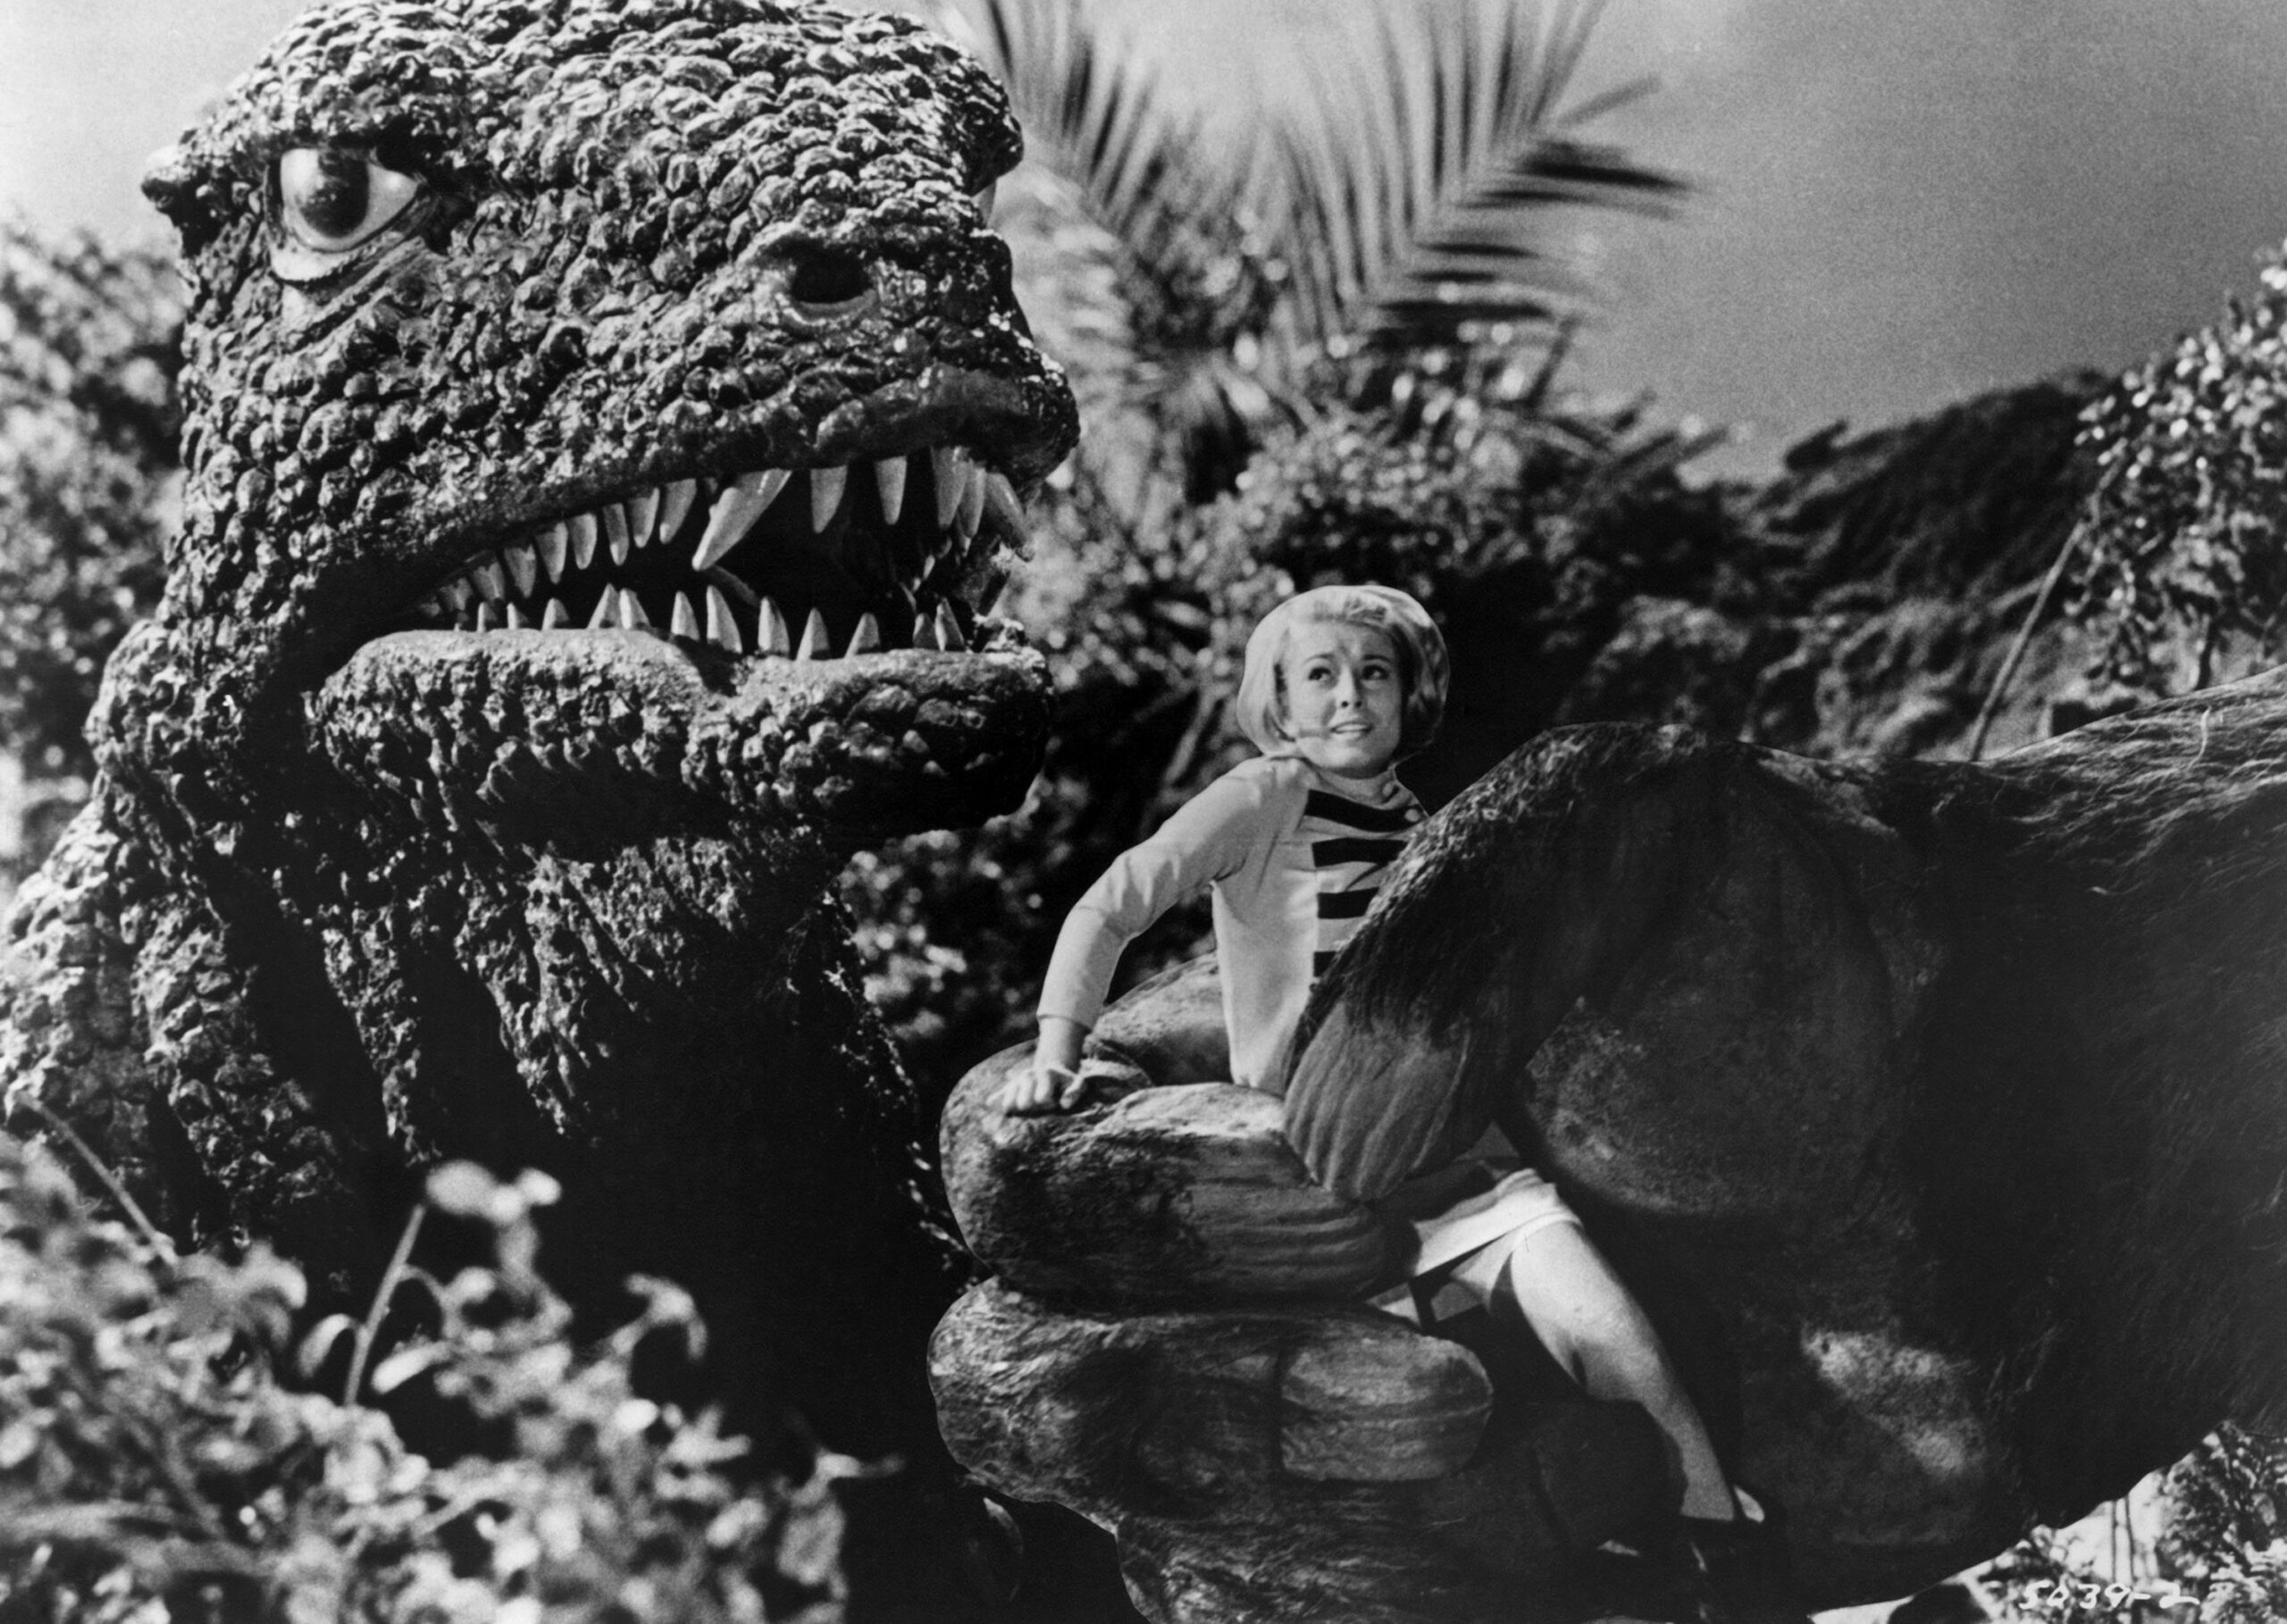 black and white photo from the 1967 Toho film "King Kong Escapes." It is a closeup of the dinosaur Gorosaurus, coming through some trees toward a woman being held in the giant ape Kong's hand.